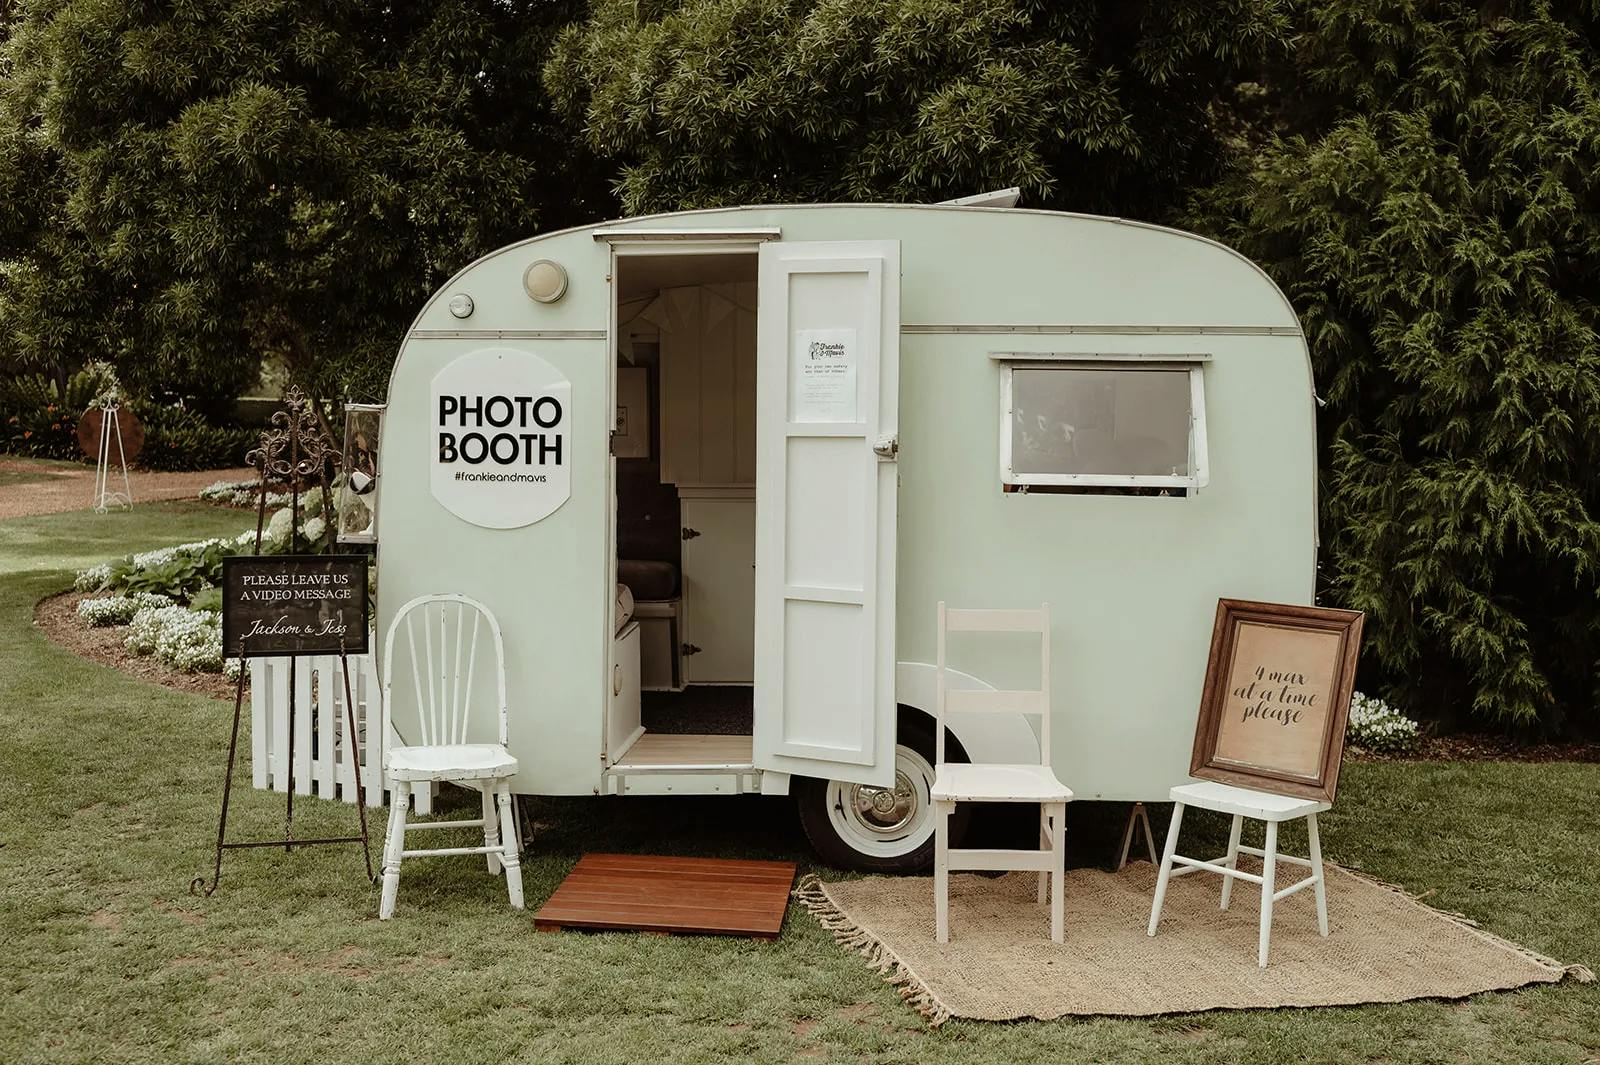 A pastel-colored trailer set up as a photo booth stands on a grassy area with trees in the background. In front, there are three chairs and a sign reading "In case you need a seat, please" on a rug. A signboard and a small table with props are placed nearby.